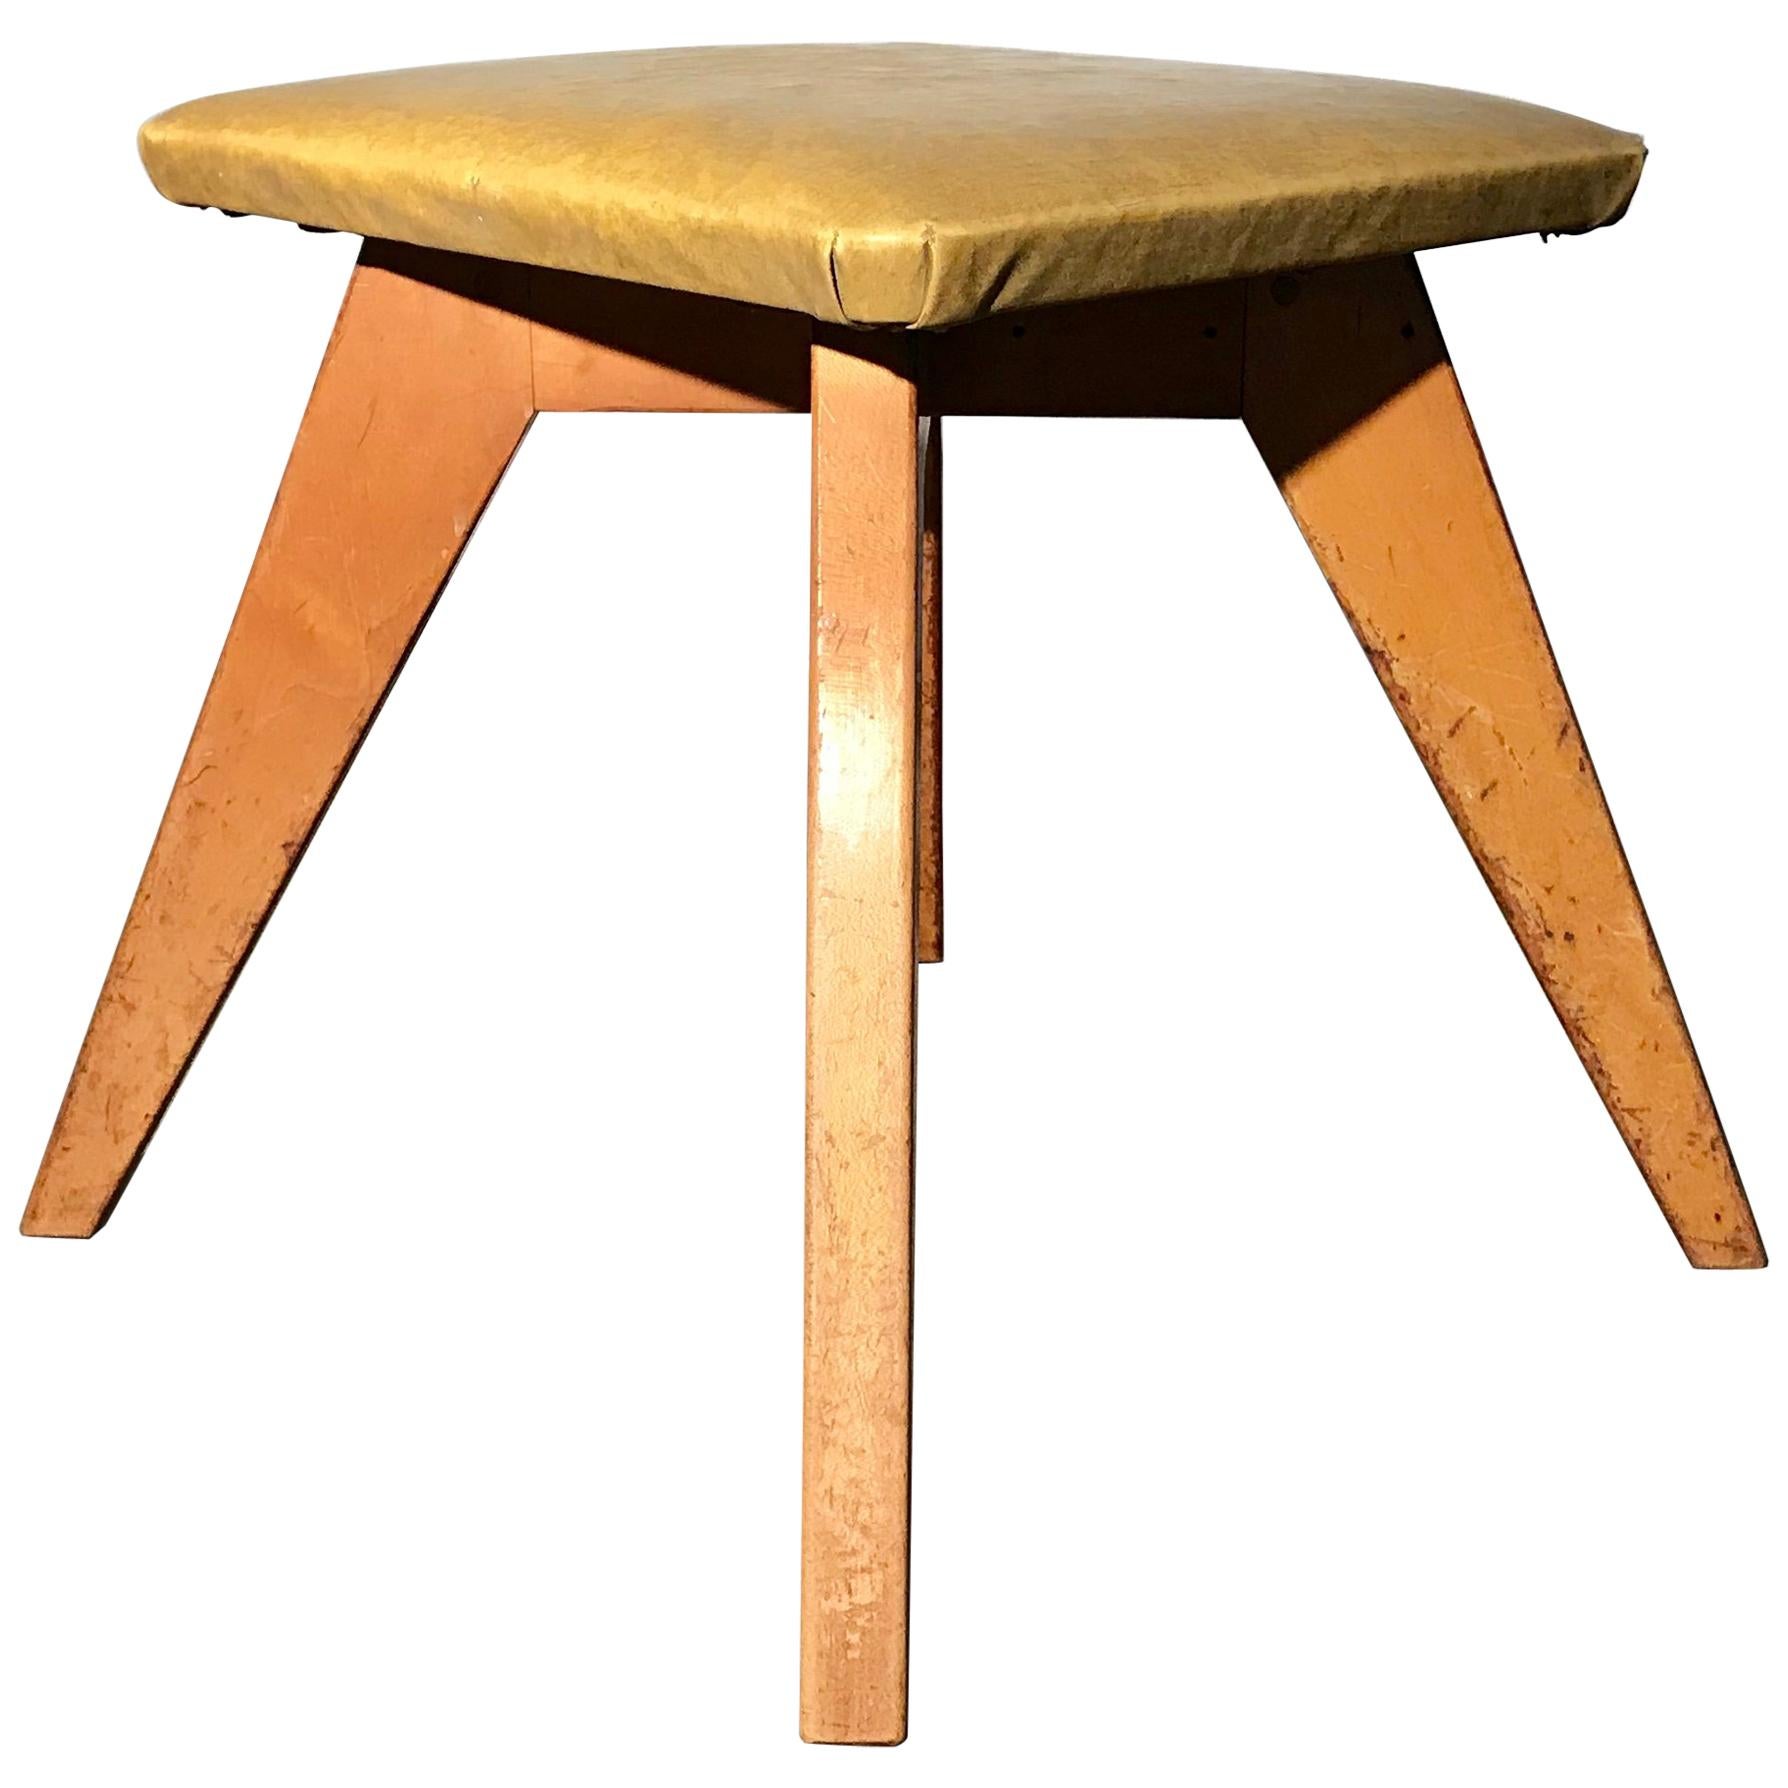 Rare and Early Jens Risom Stool for Knoll Associates, New York City For Sale